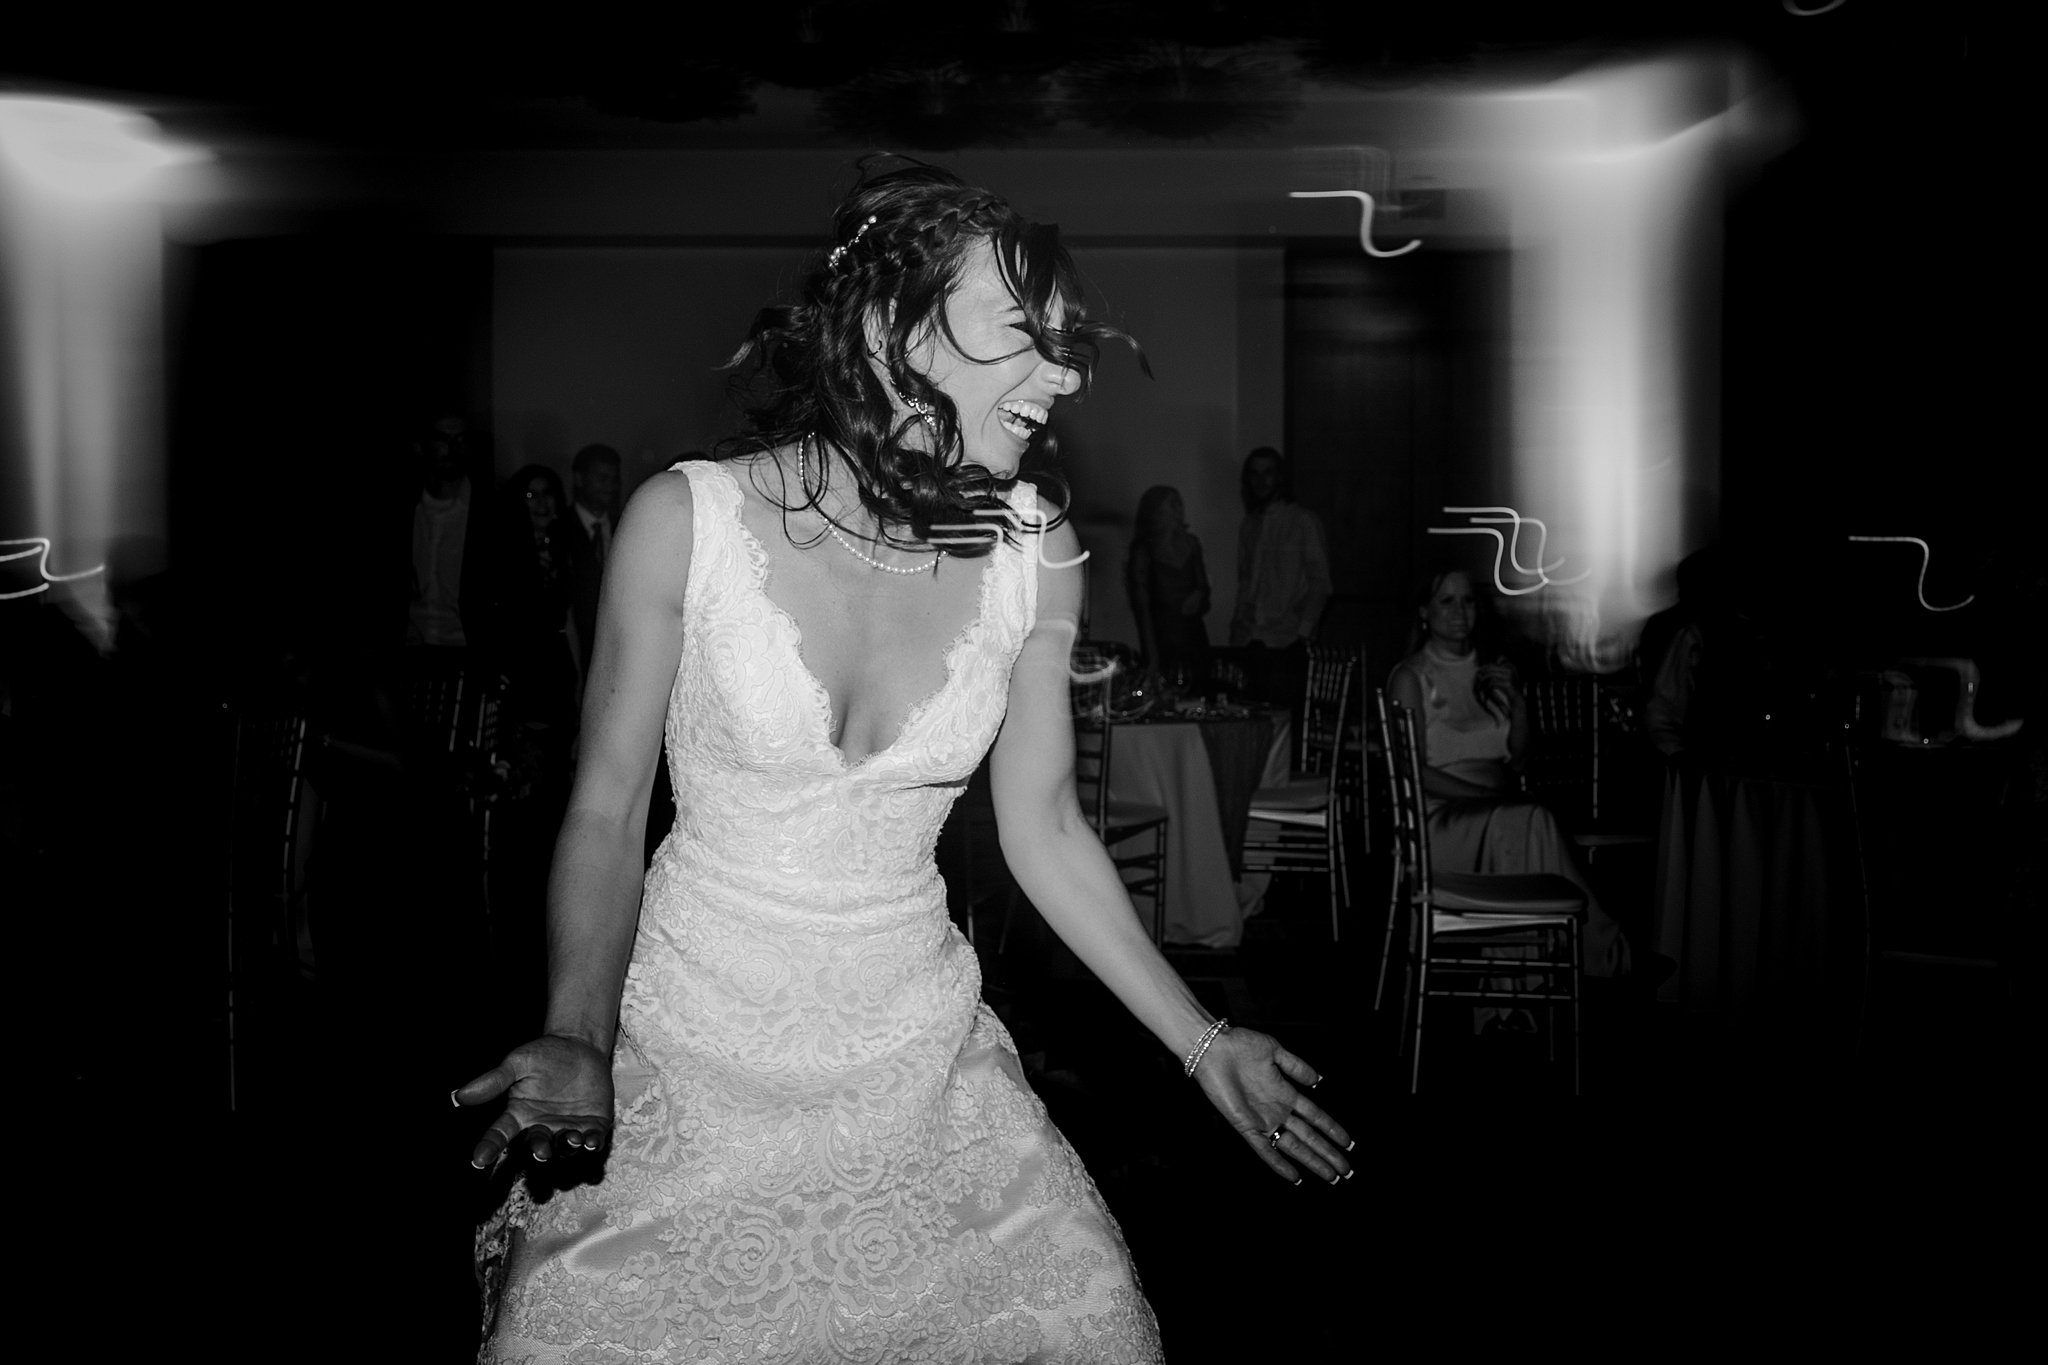 Wedding Reception at the Boulders Resort, Bride and Groom, The Hoskins Photography